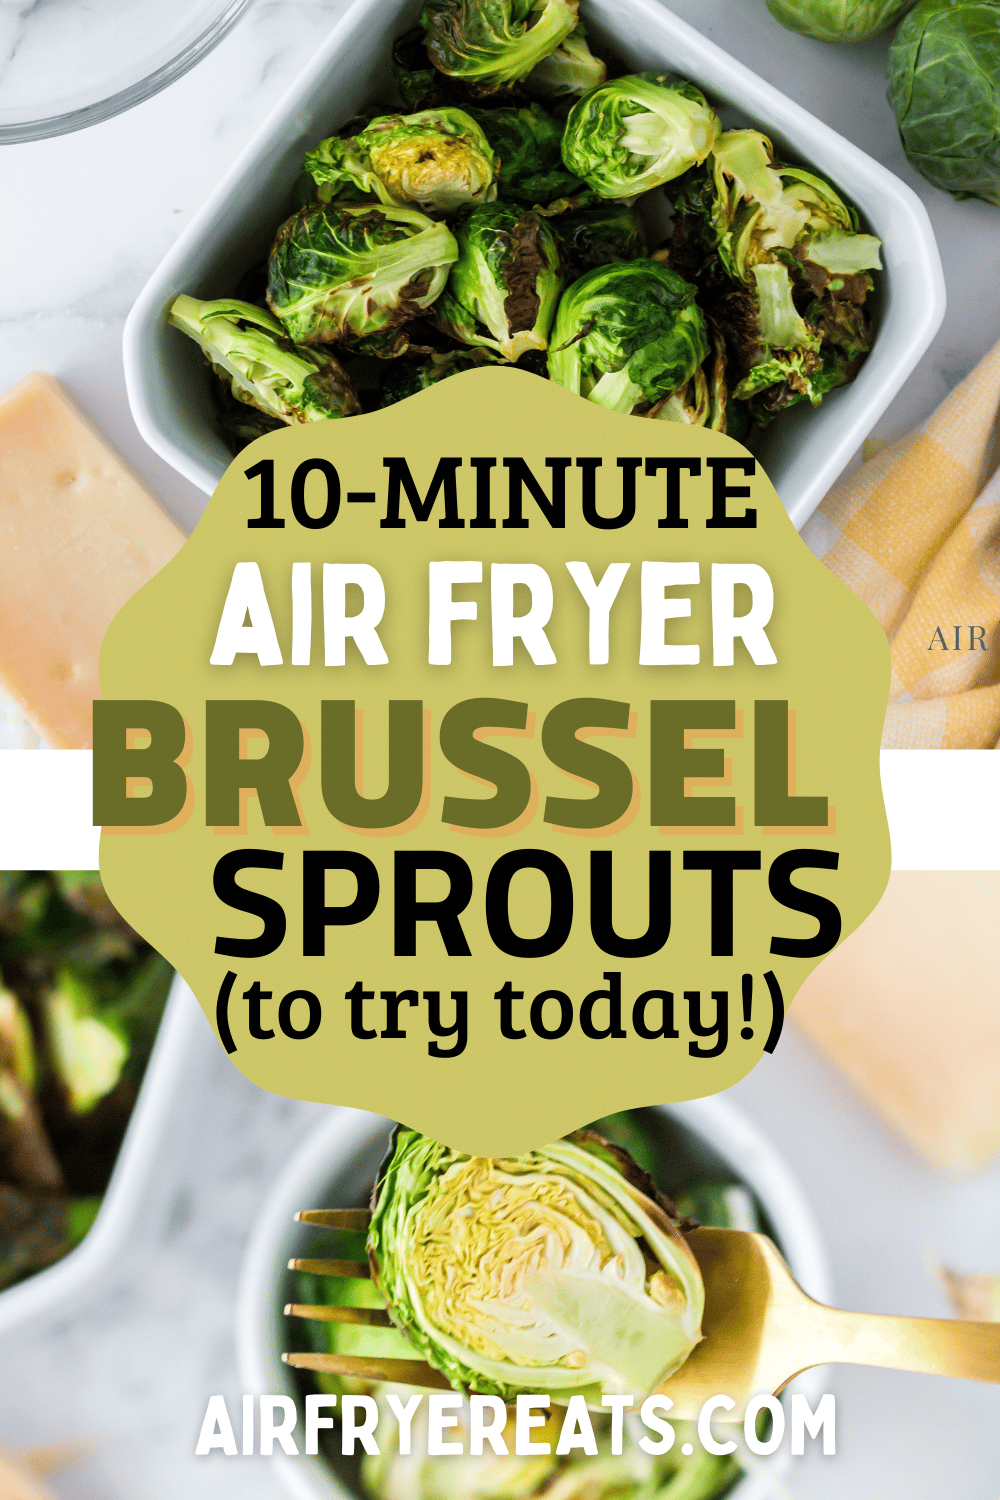 Ninja Foodi Brussel Sprouts are made using the air fryer function of the Foodi to bring out their best! via @vegetarianmamma